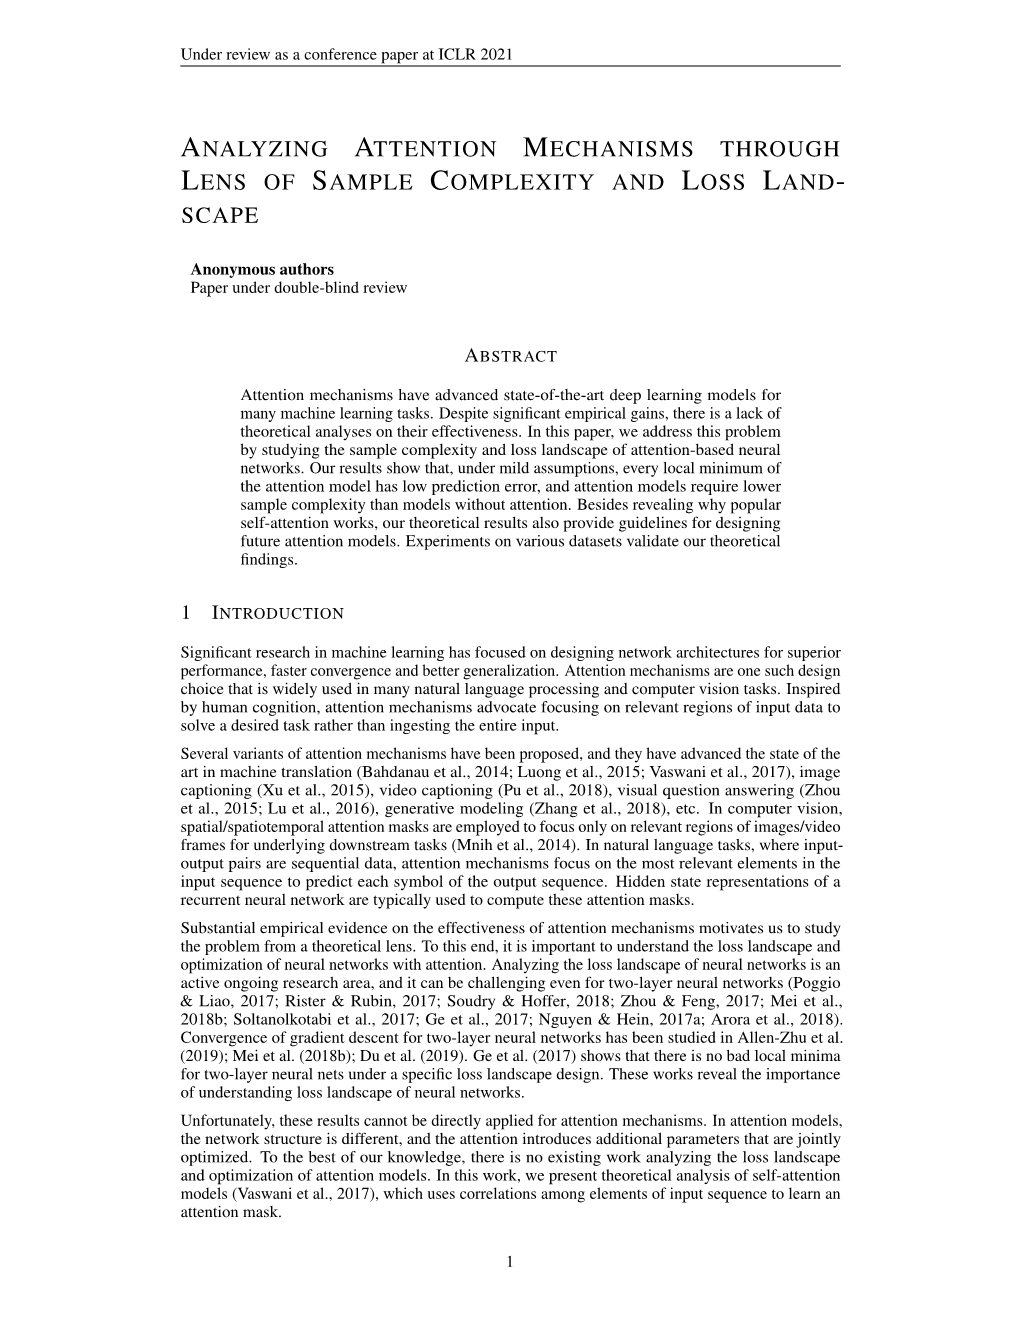 Analyzing Attention Mechanisms Through Lens of Sample Complexity and Loss Land